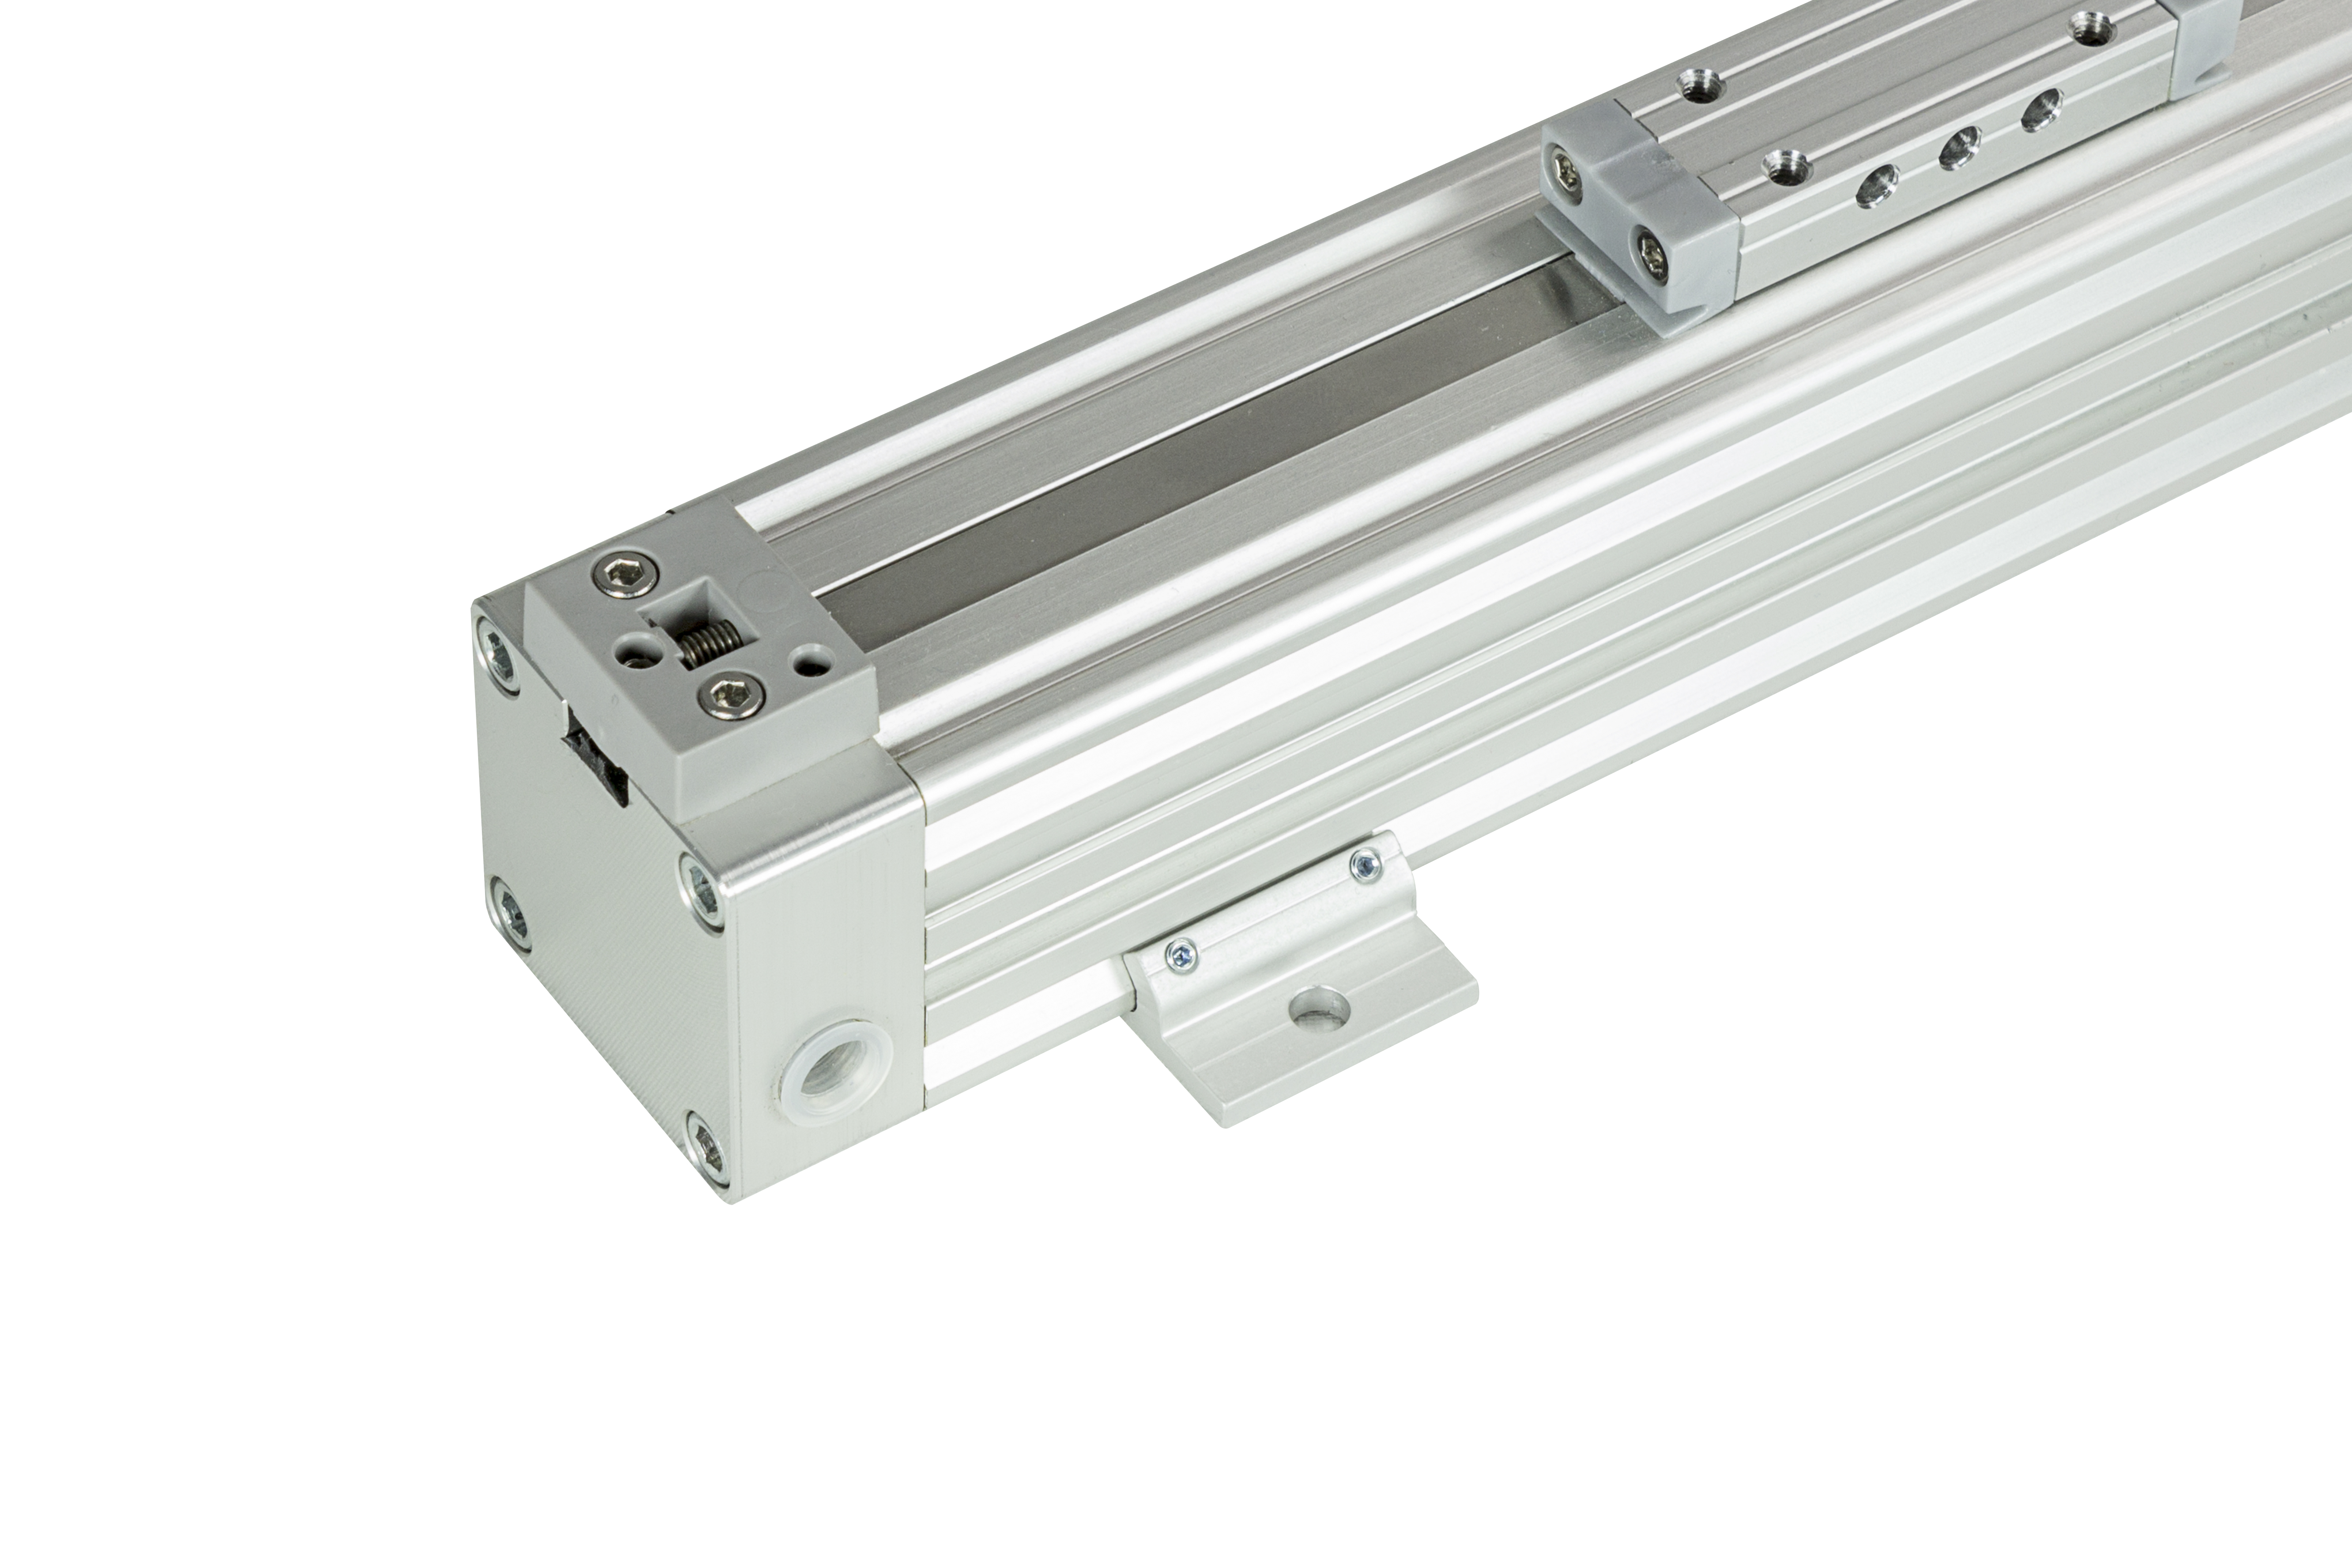 Intermediate supports for Z series rodless pneumatic cylinders